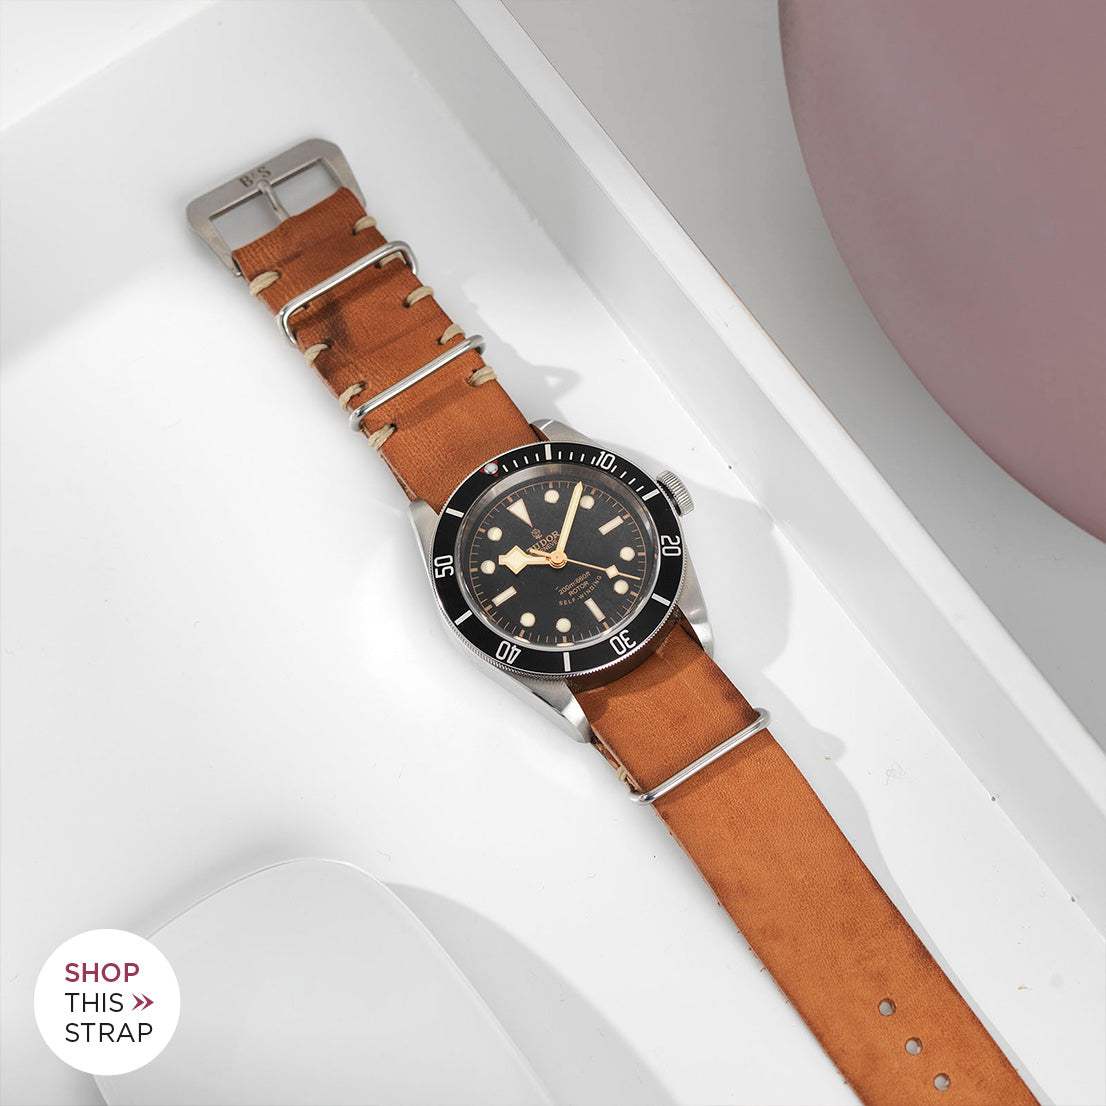 Bulang and Sons_Strap Guide_The Tudor Black Bay Black 79220N_Caramel Brown Nato Leather Watch Strap